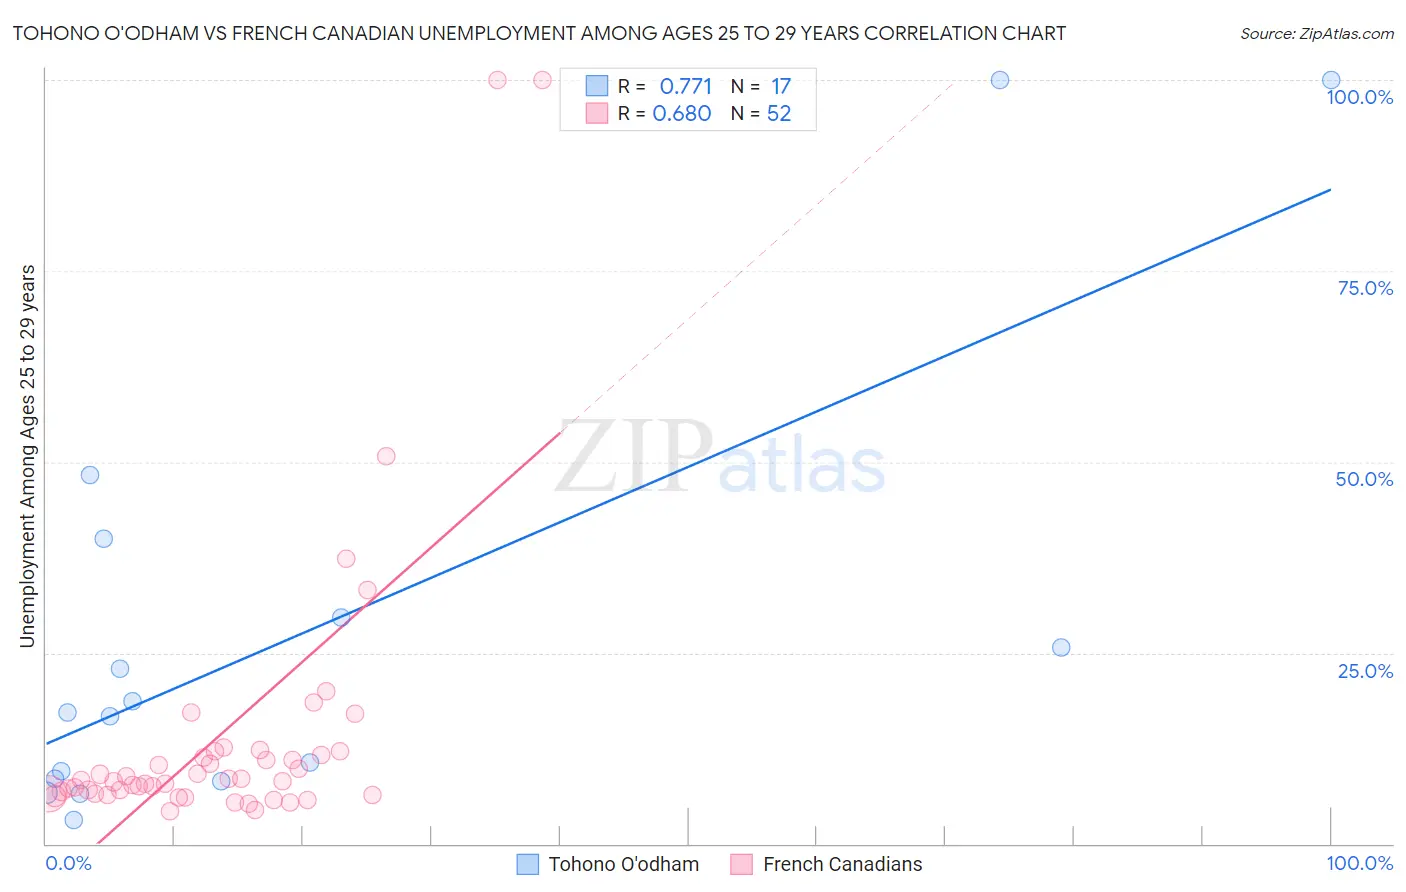 Tohono O'odham vs French Canadian Unemployment Among Ages 25 to 29 years